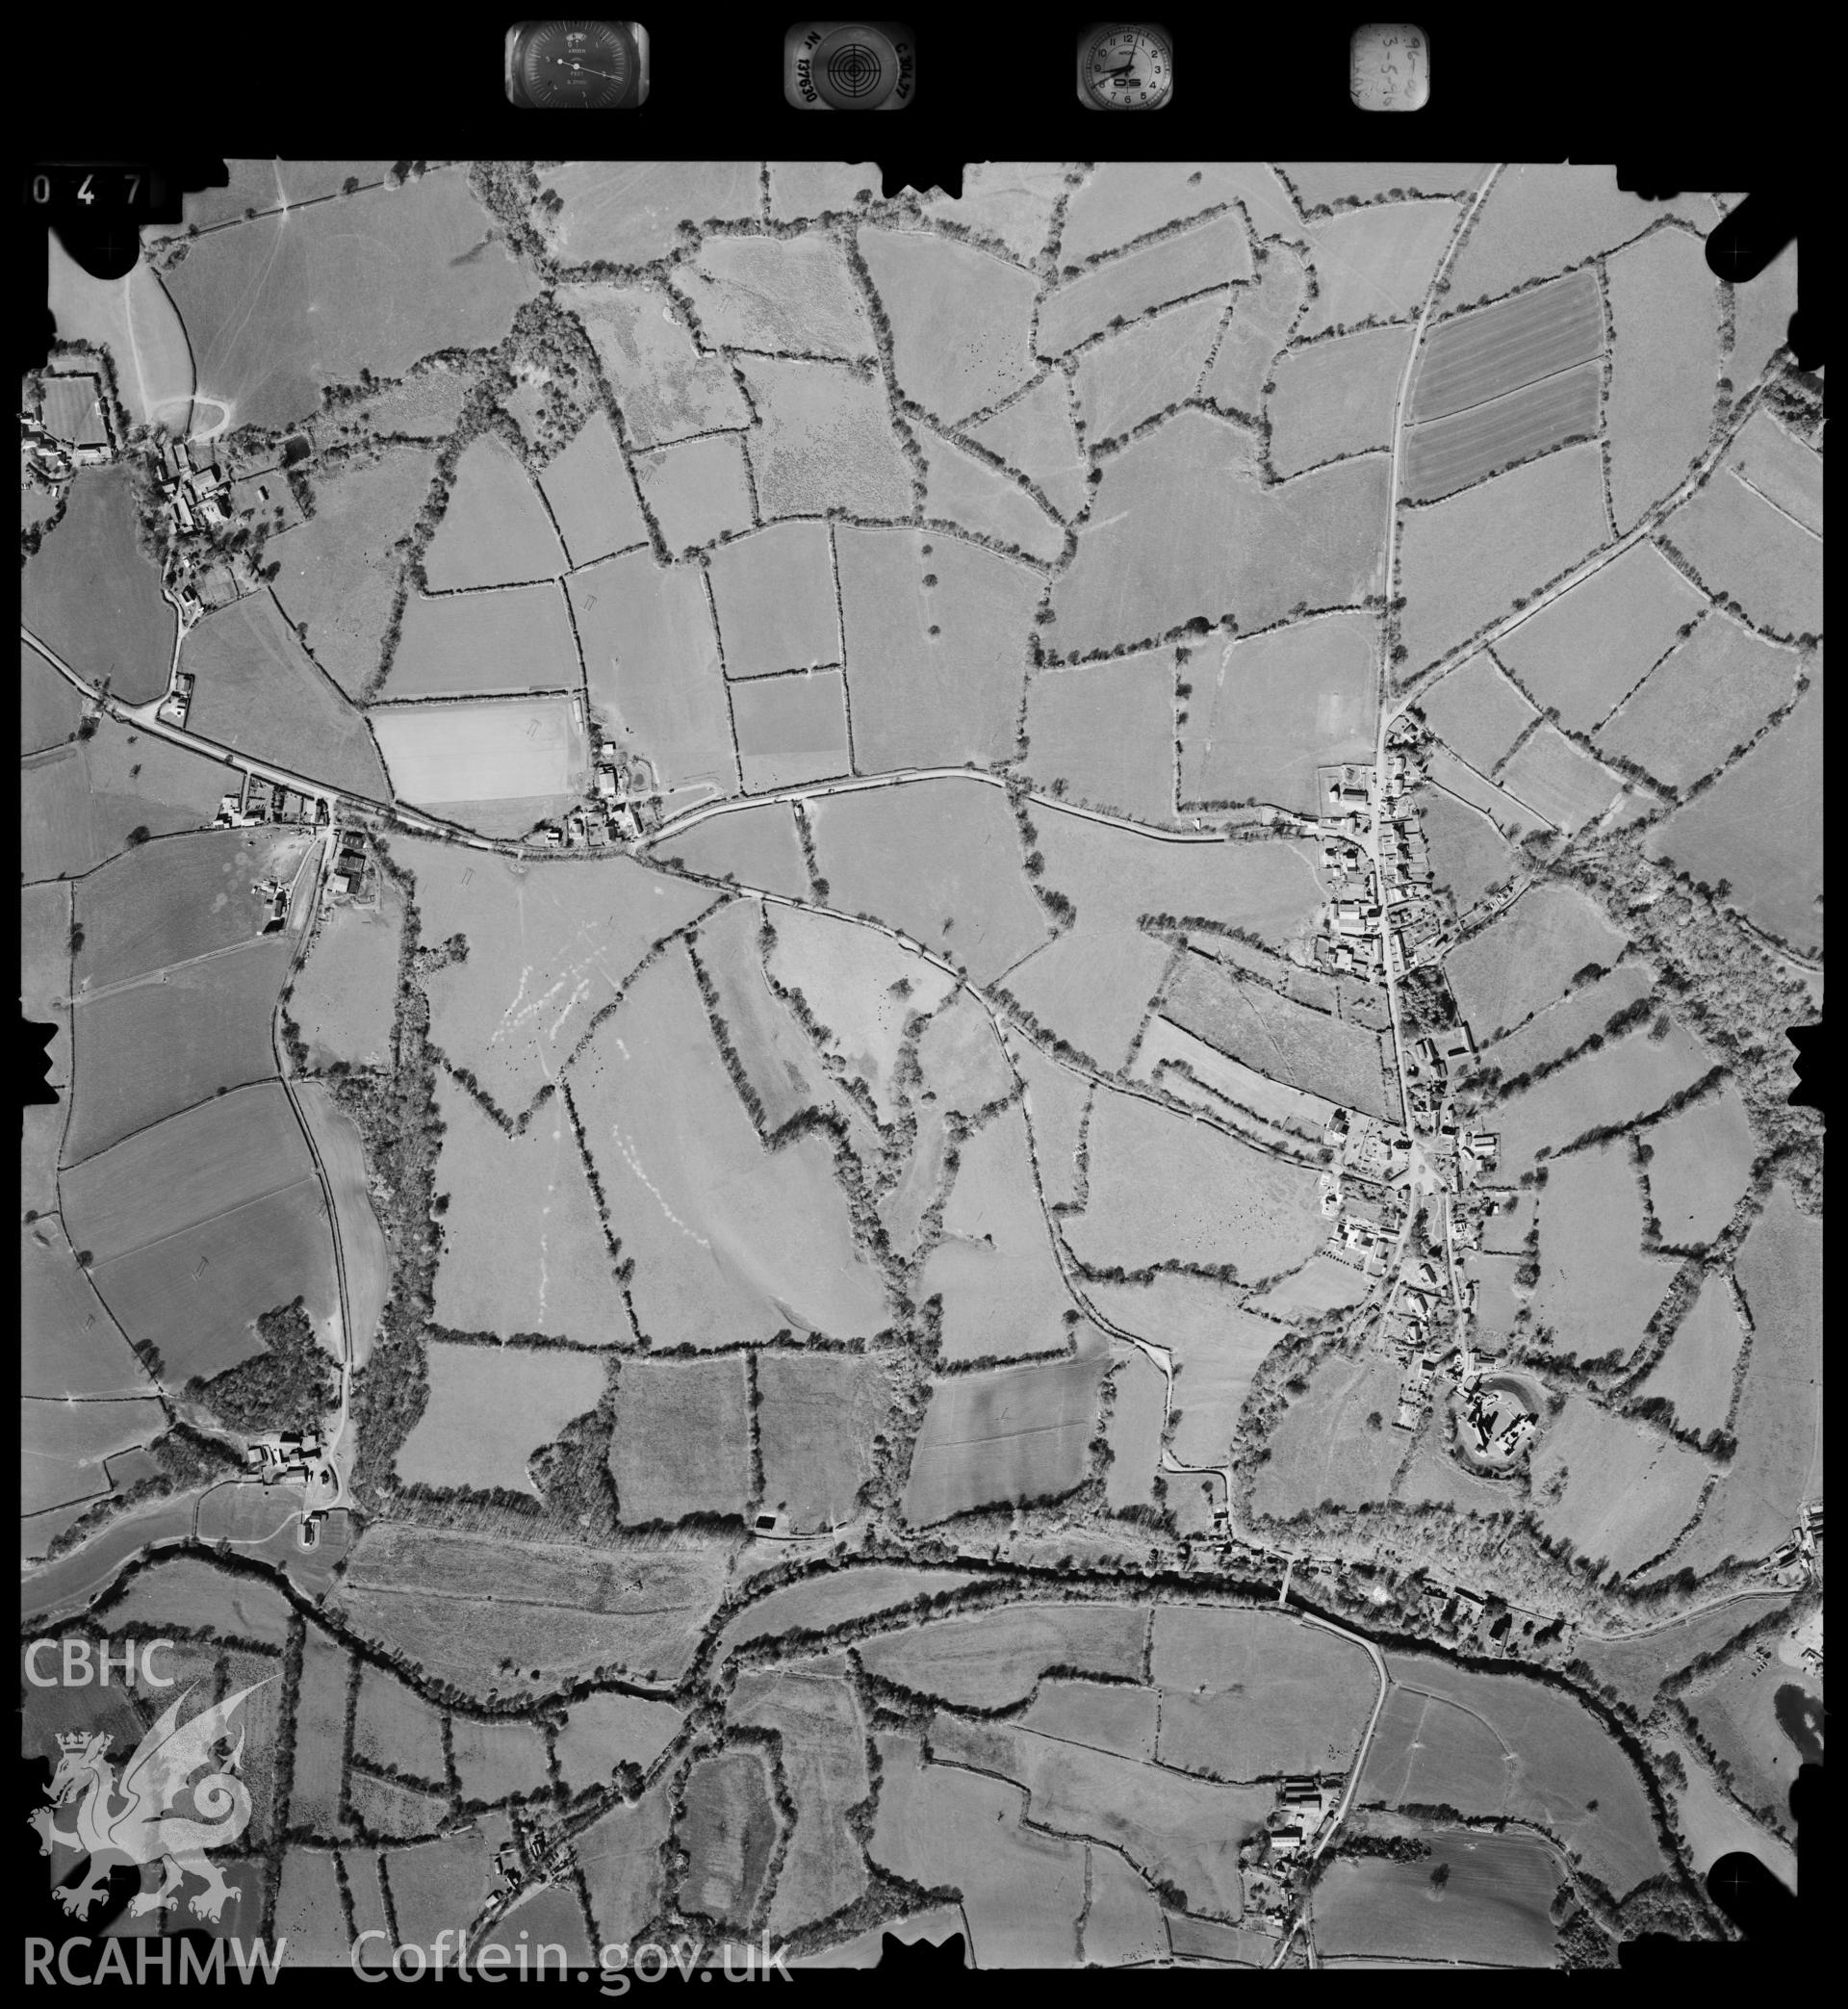 Digitized copy of an aerial photograph showing Llawhaden area, taken by Ordnance Survey, 1996